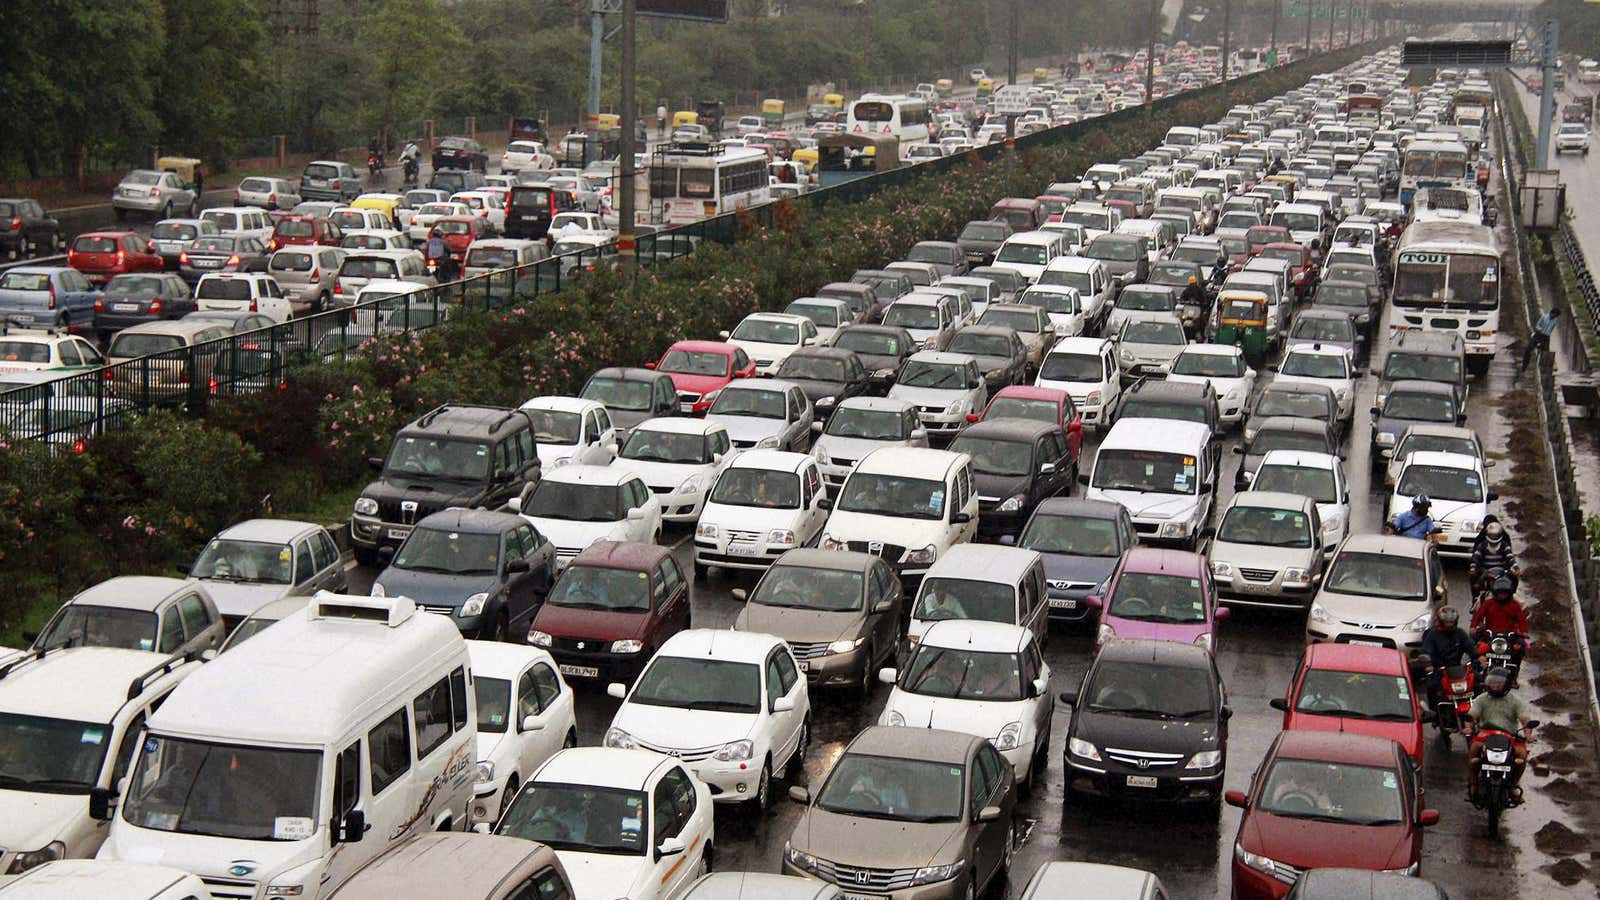 Does India really look like it needs more cars?